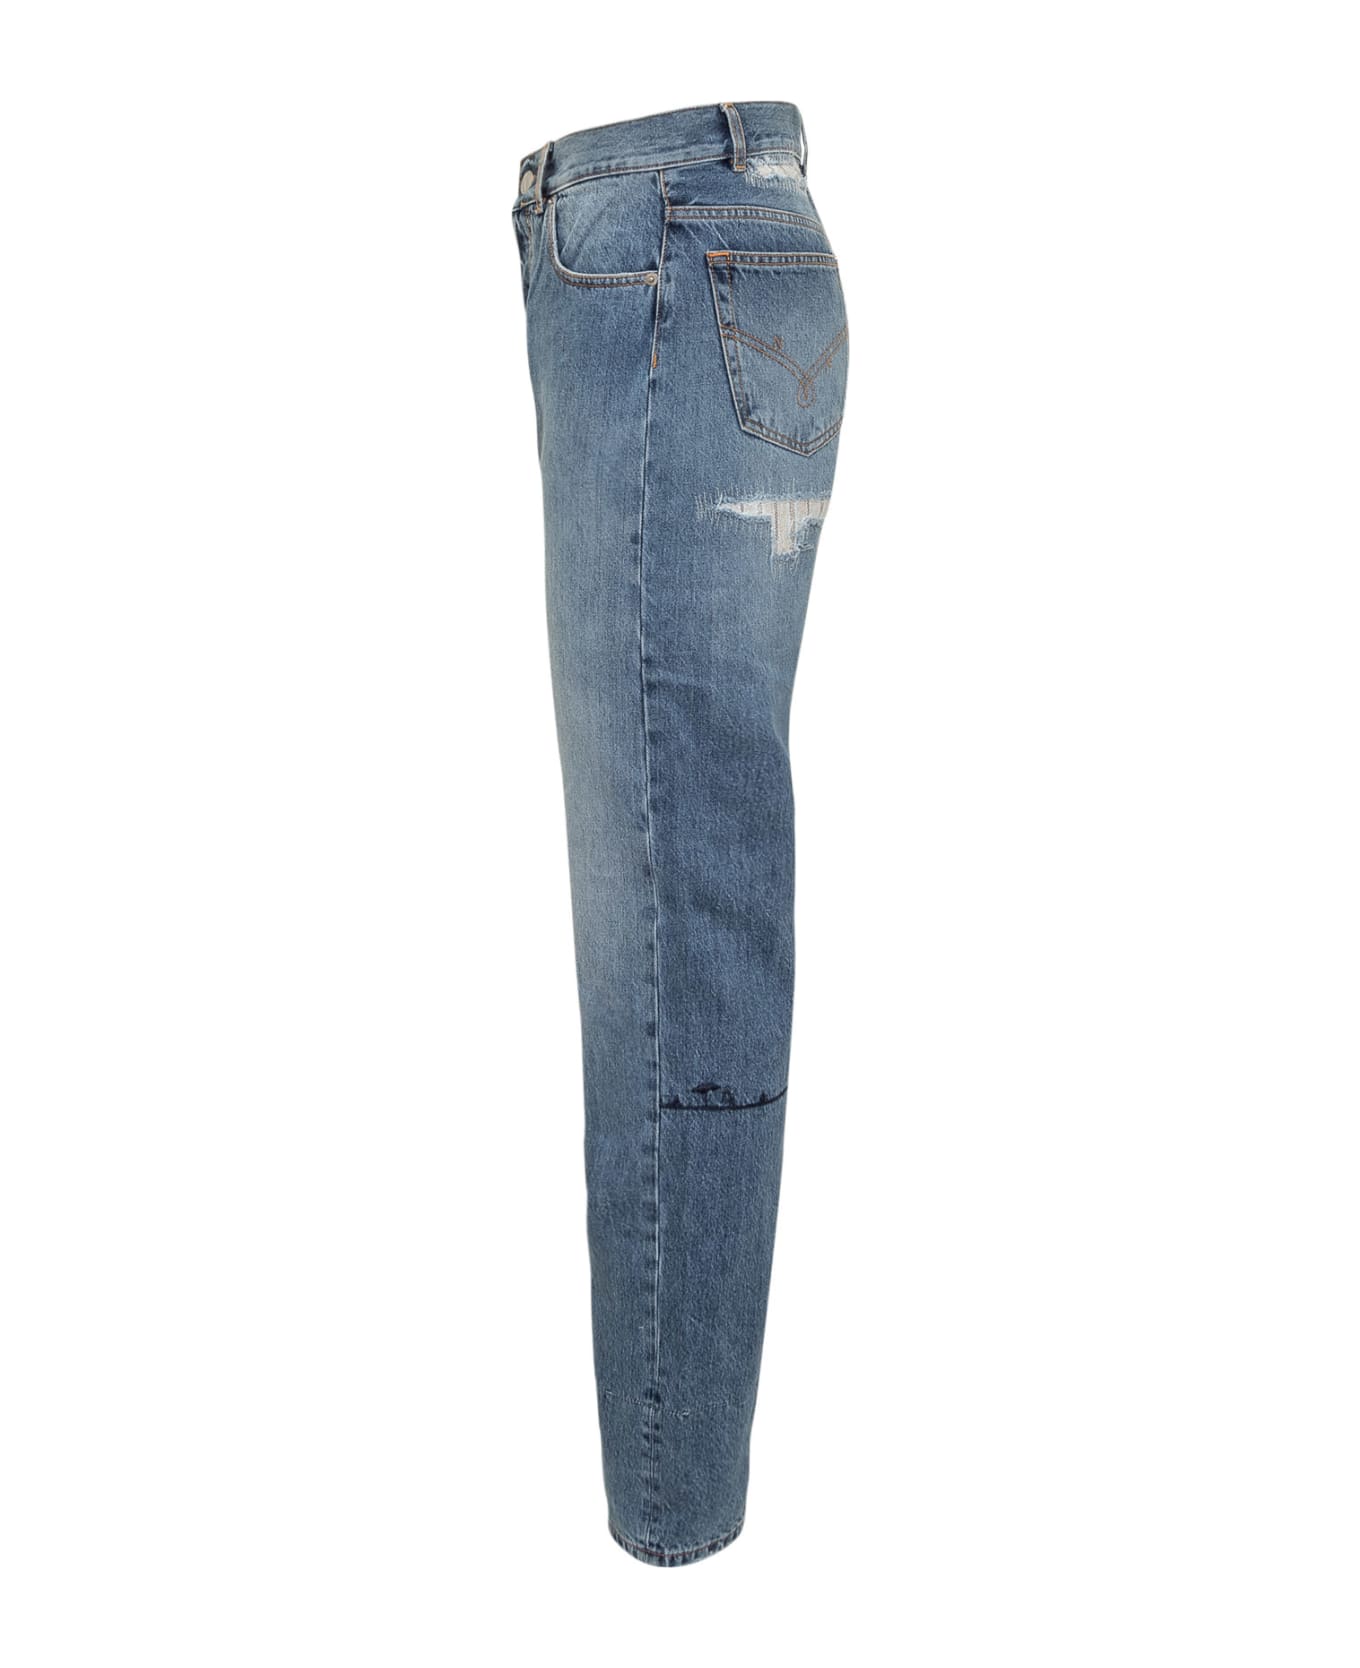 Nick Fouquet Jeans With Embroidery - DARK BLUE